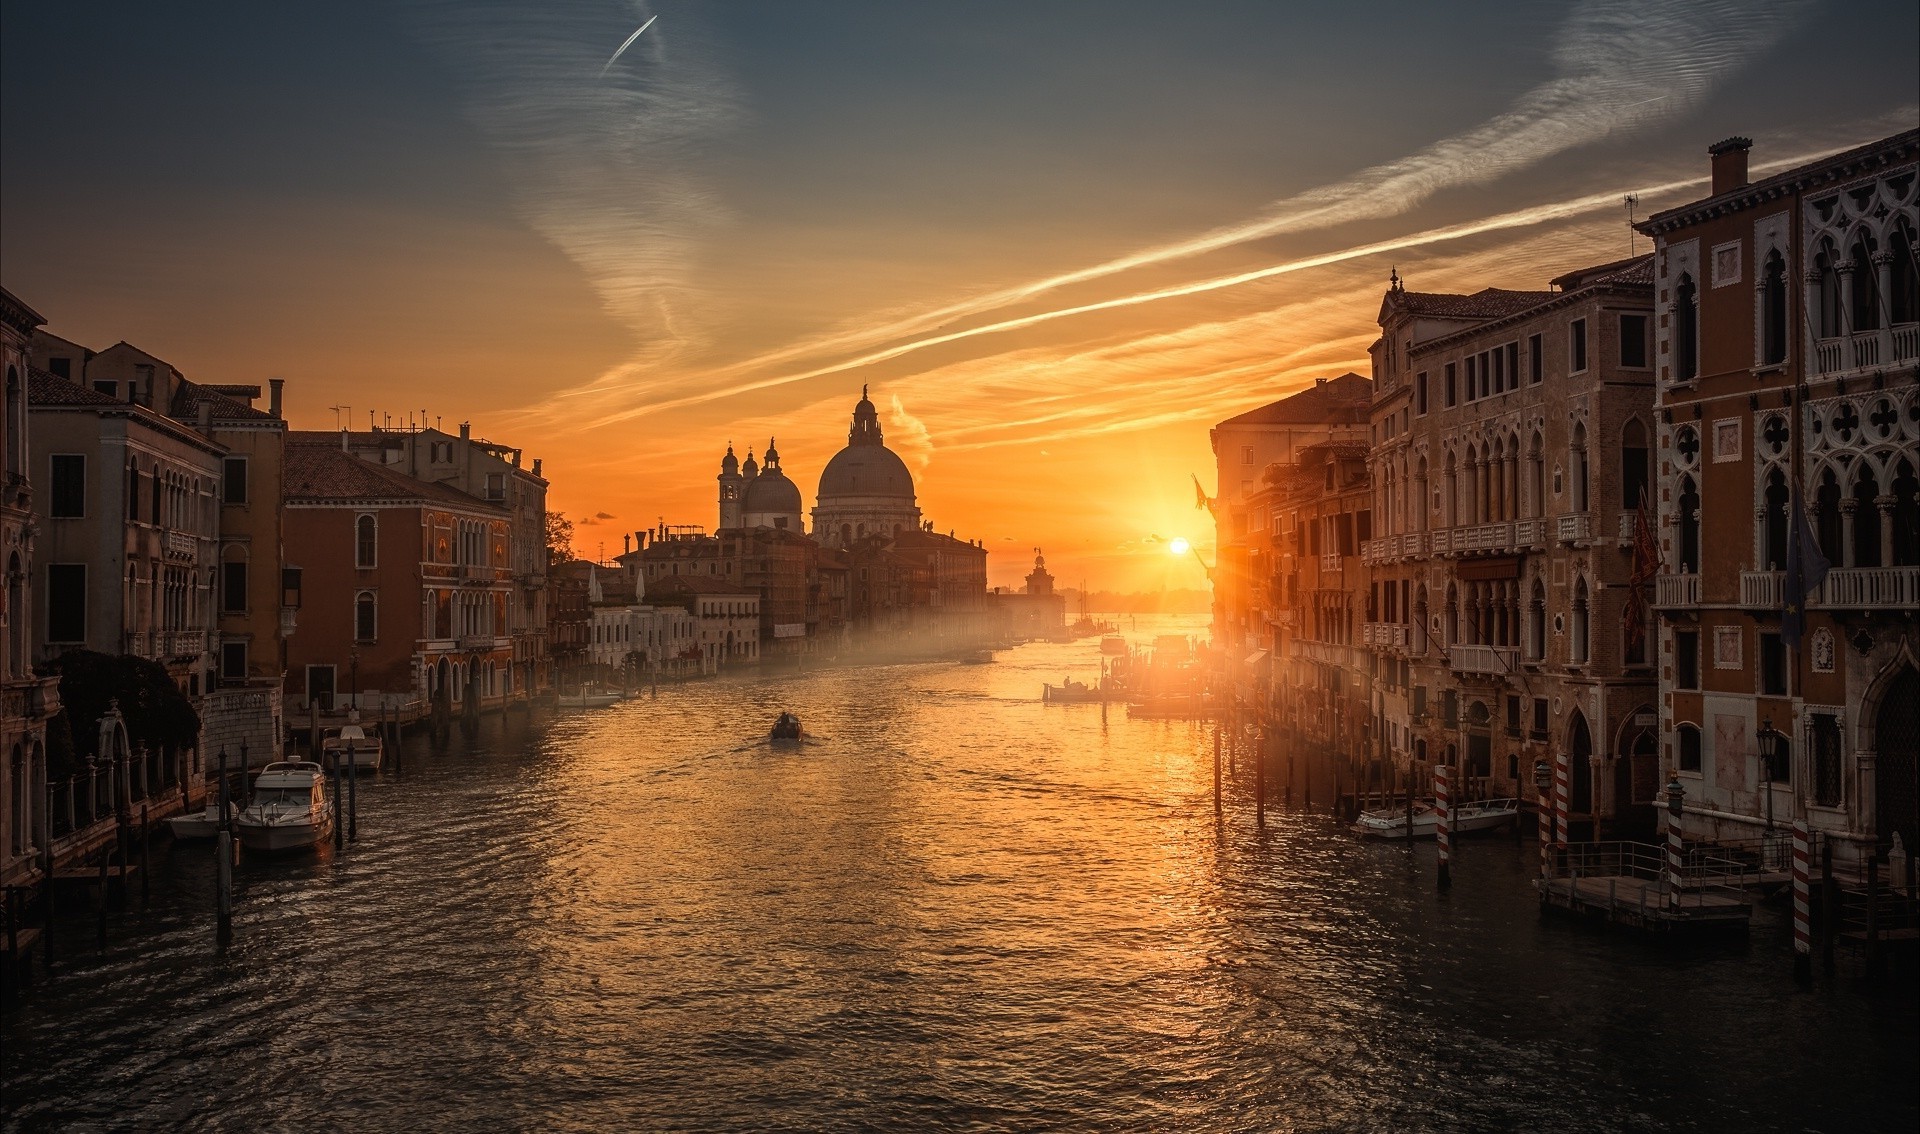 nature, Landscape, Photography, Sunset, Canal, Boat, Building, Clouds, Sunlight, Venice, Italy Wallpaper